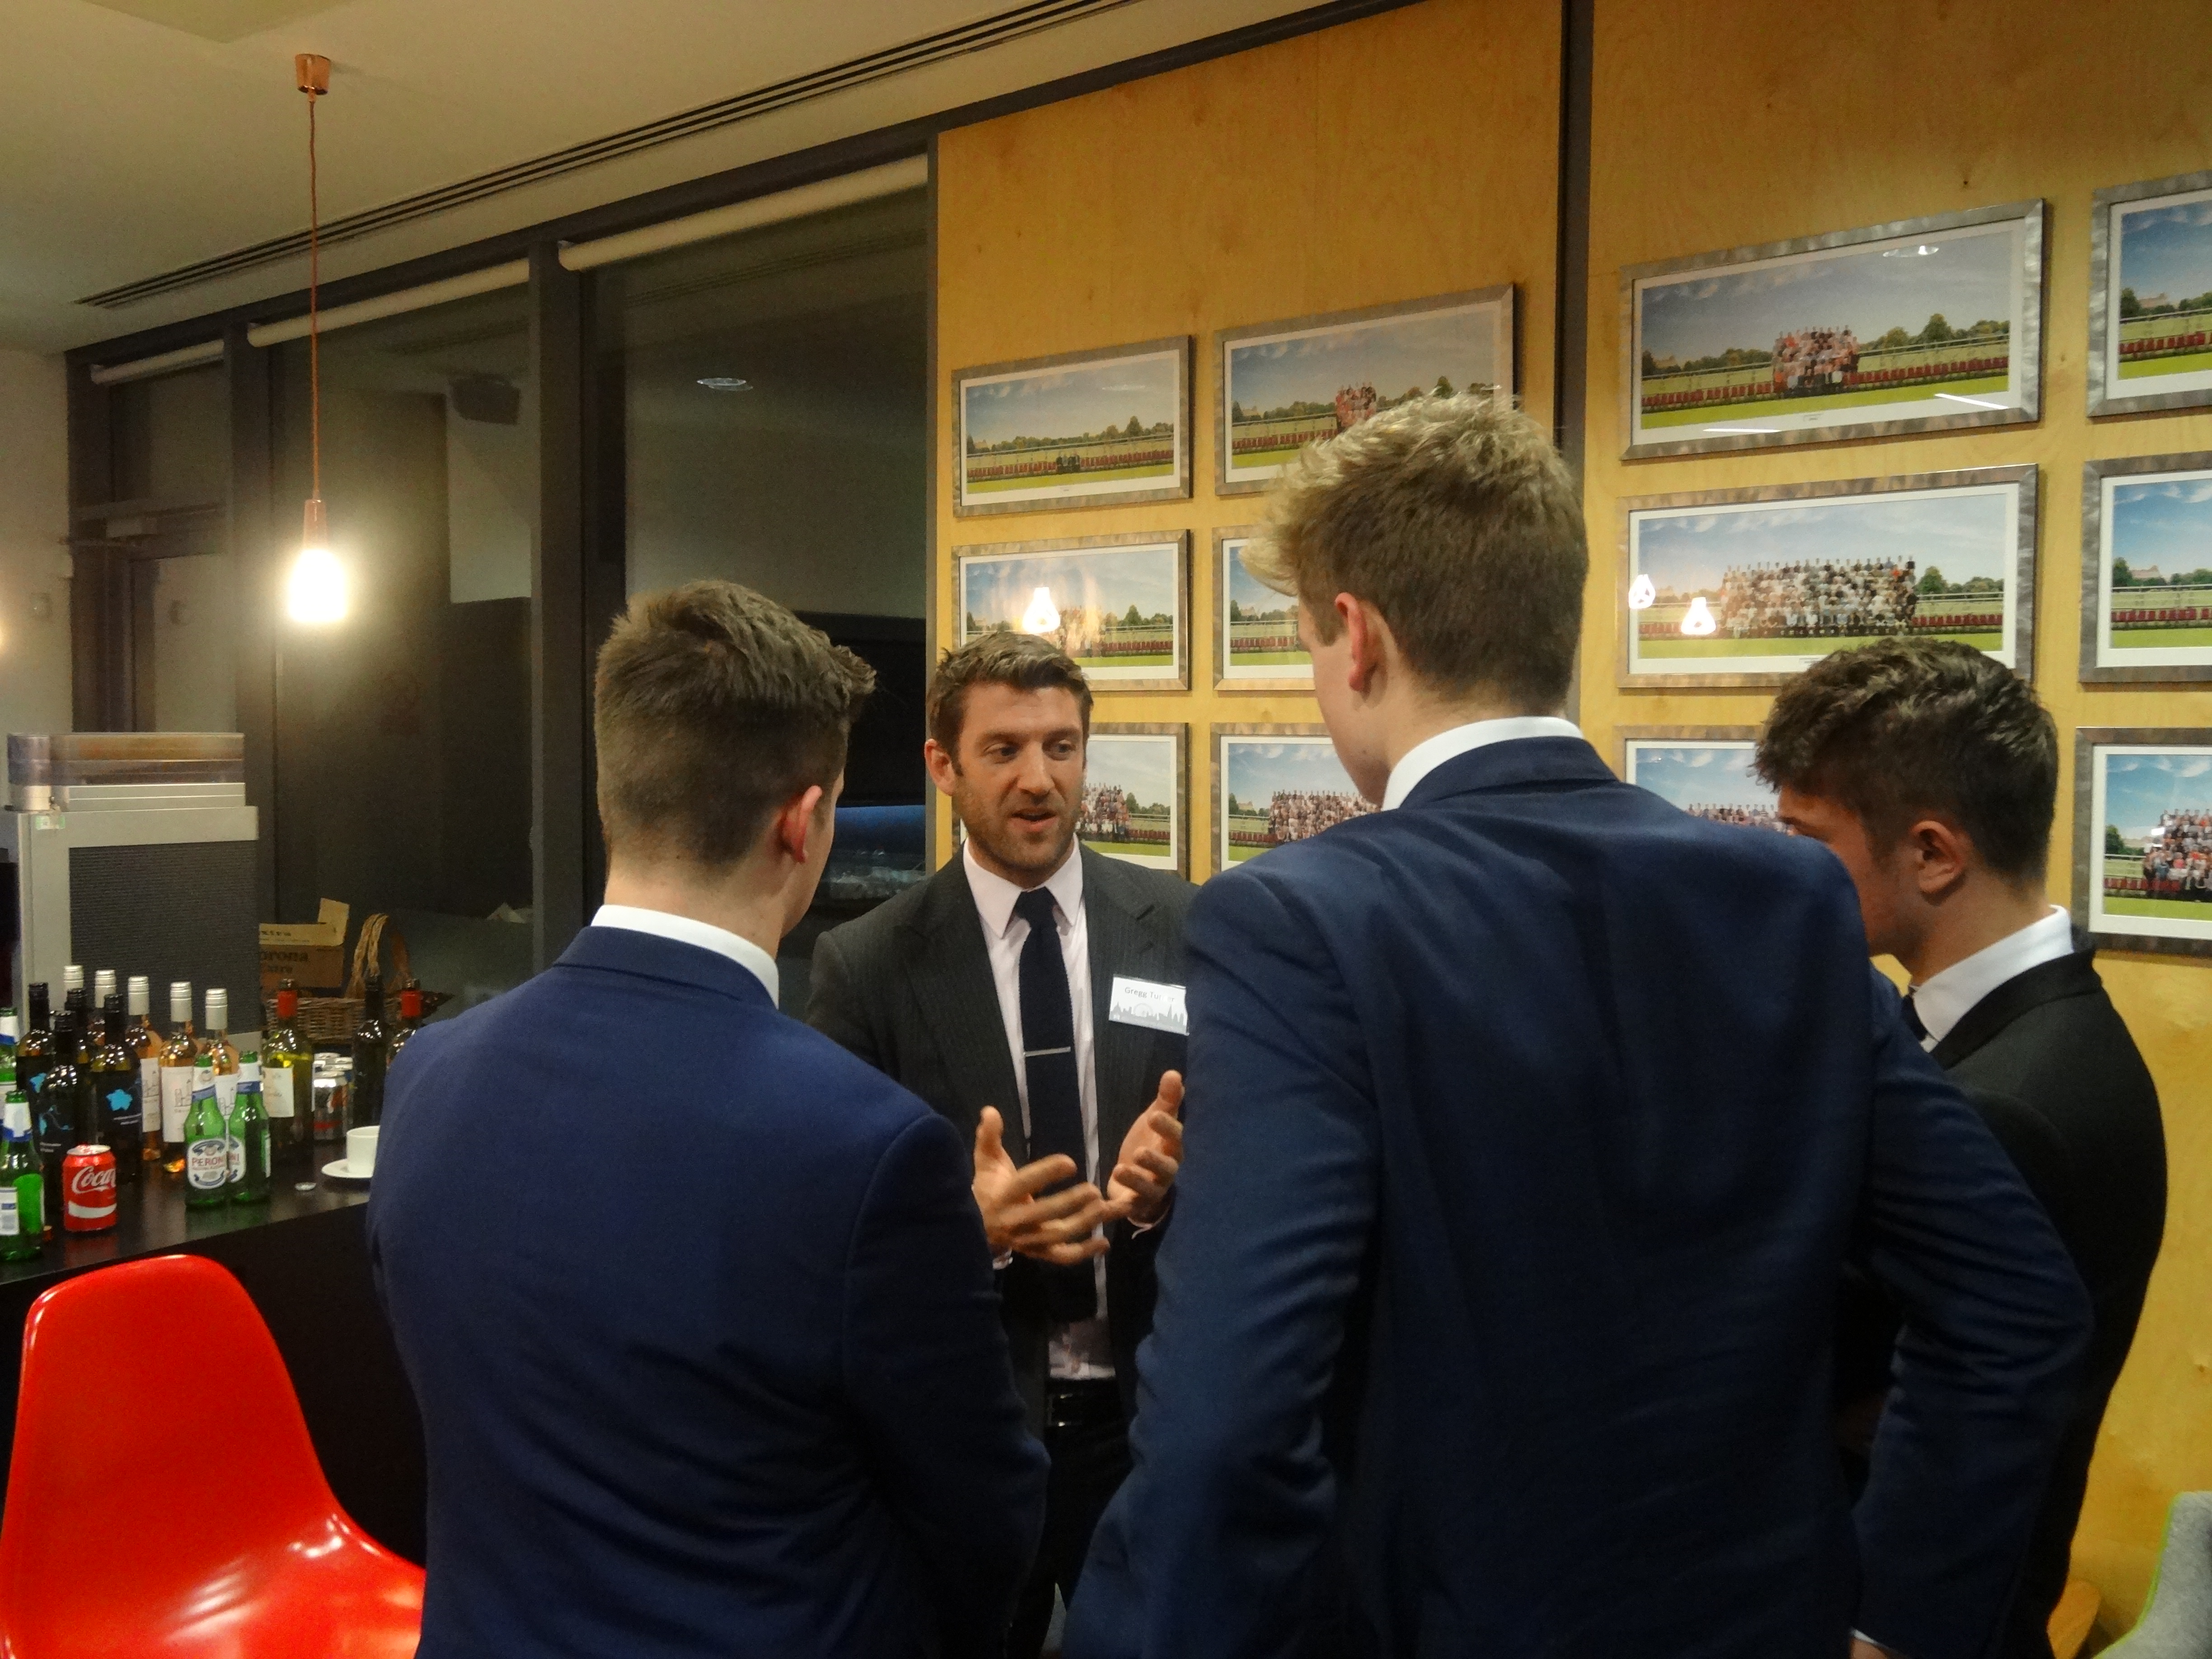 Gregg Turner ('95) chatting with Sixth Form